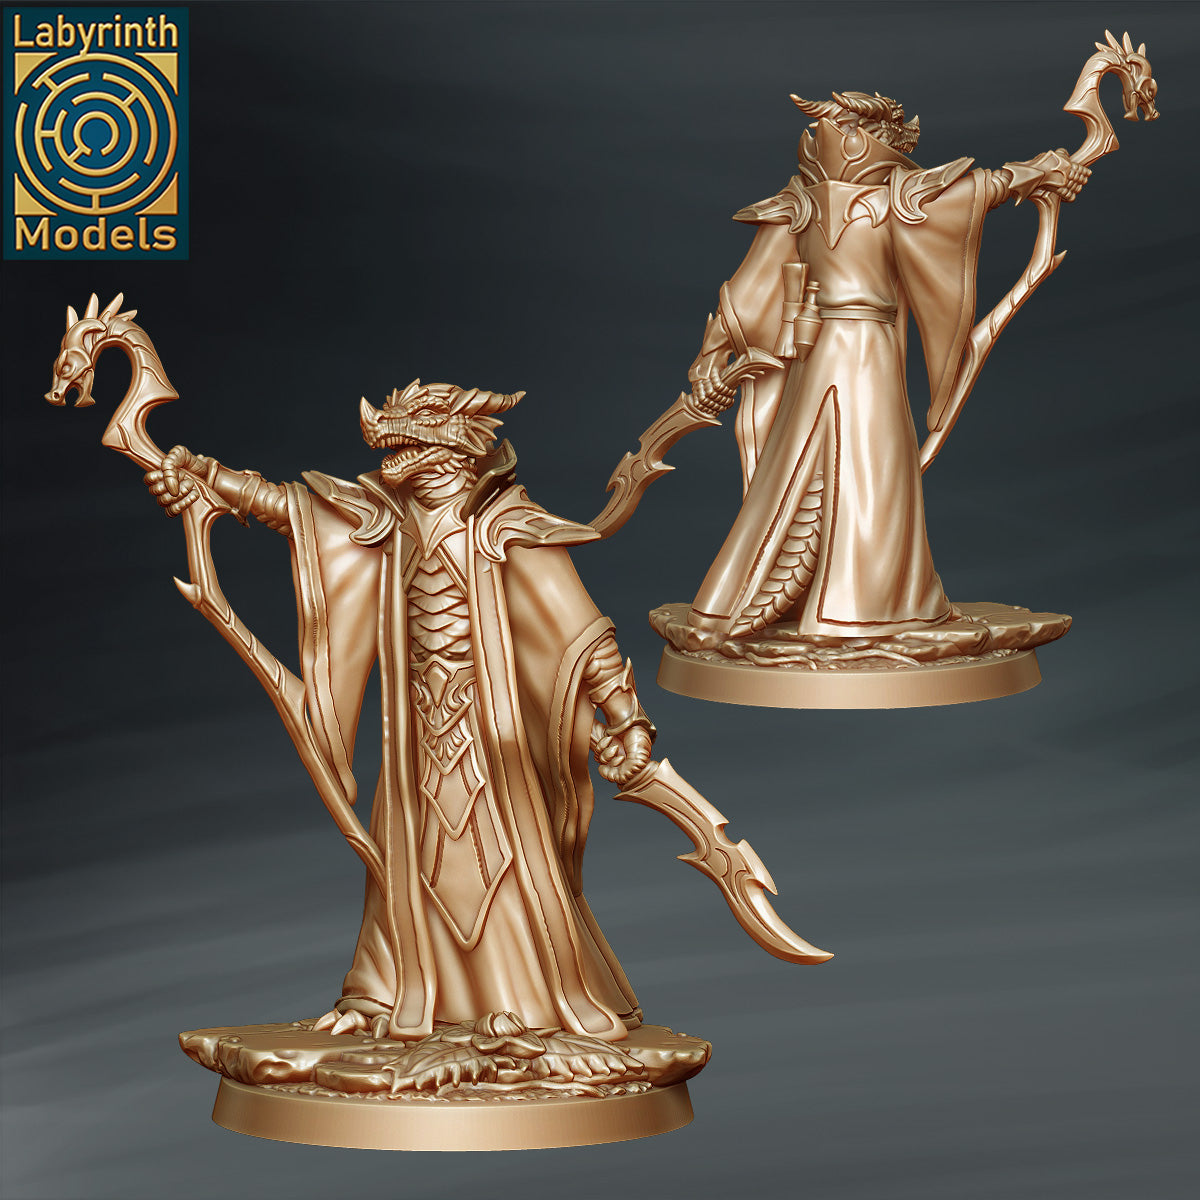 Dragon Mage by Labyrinth Models